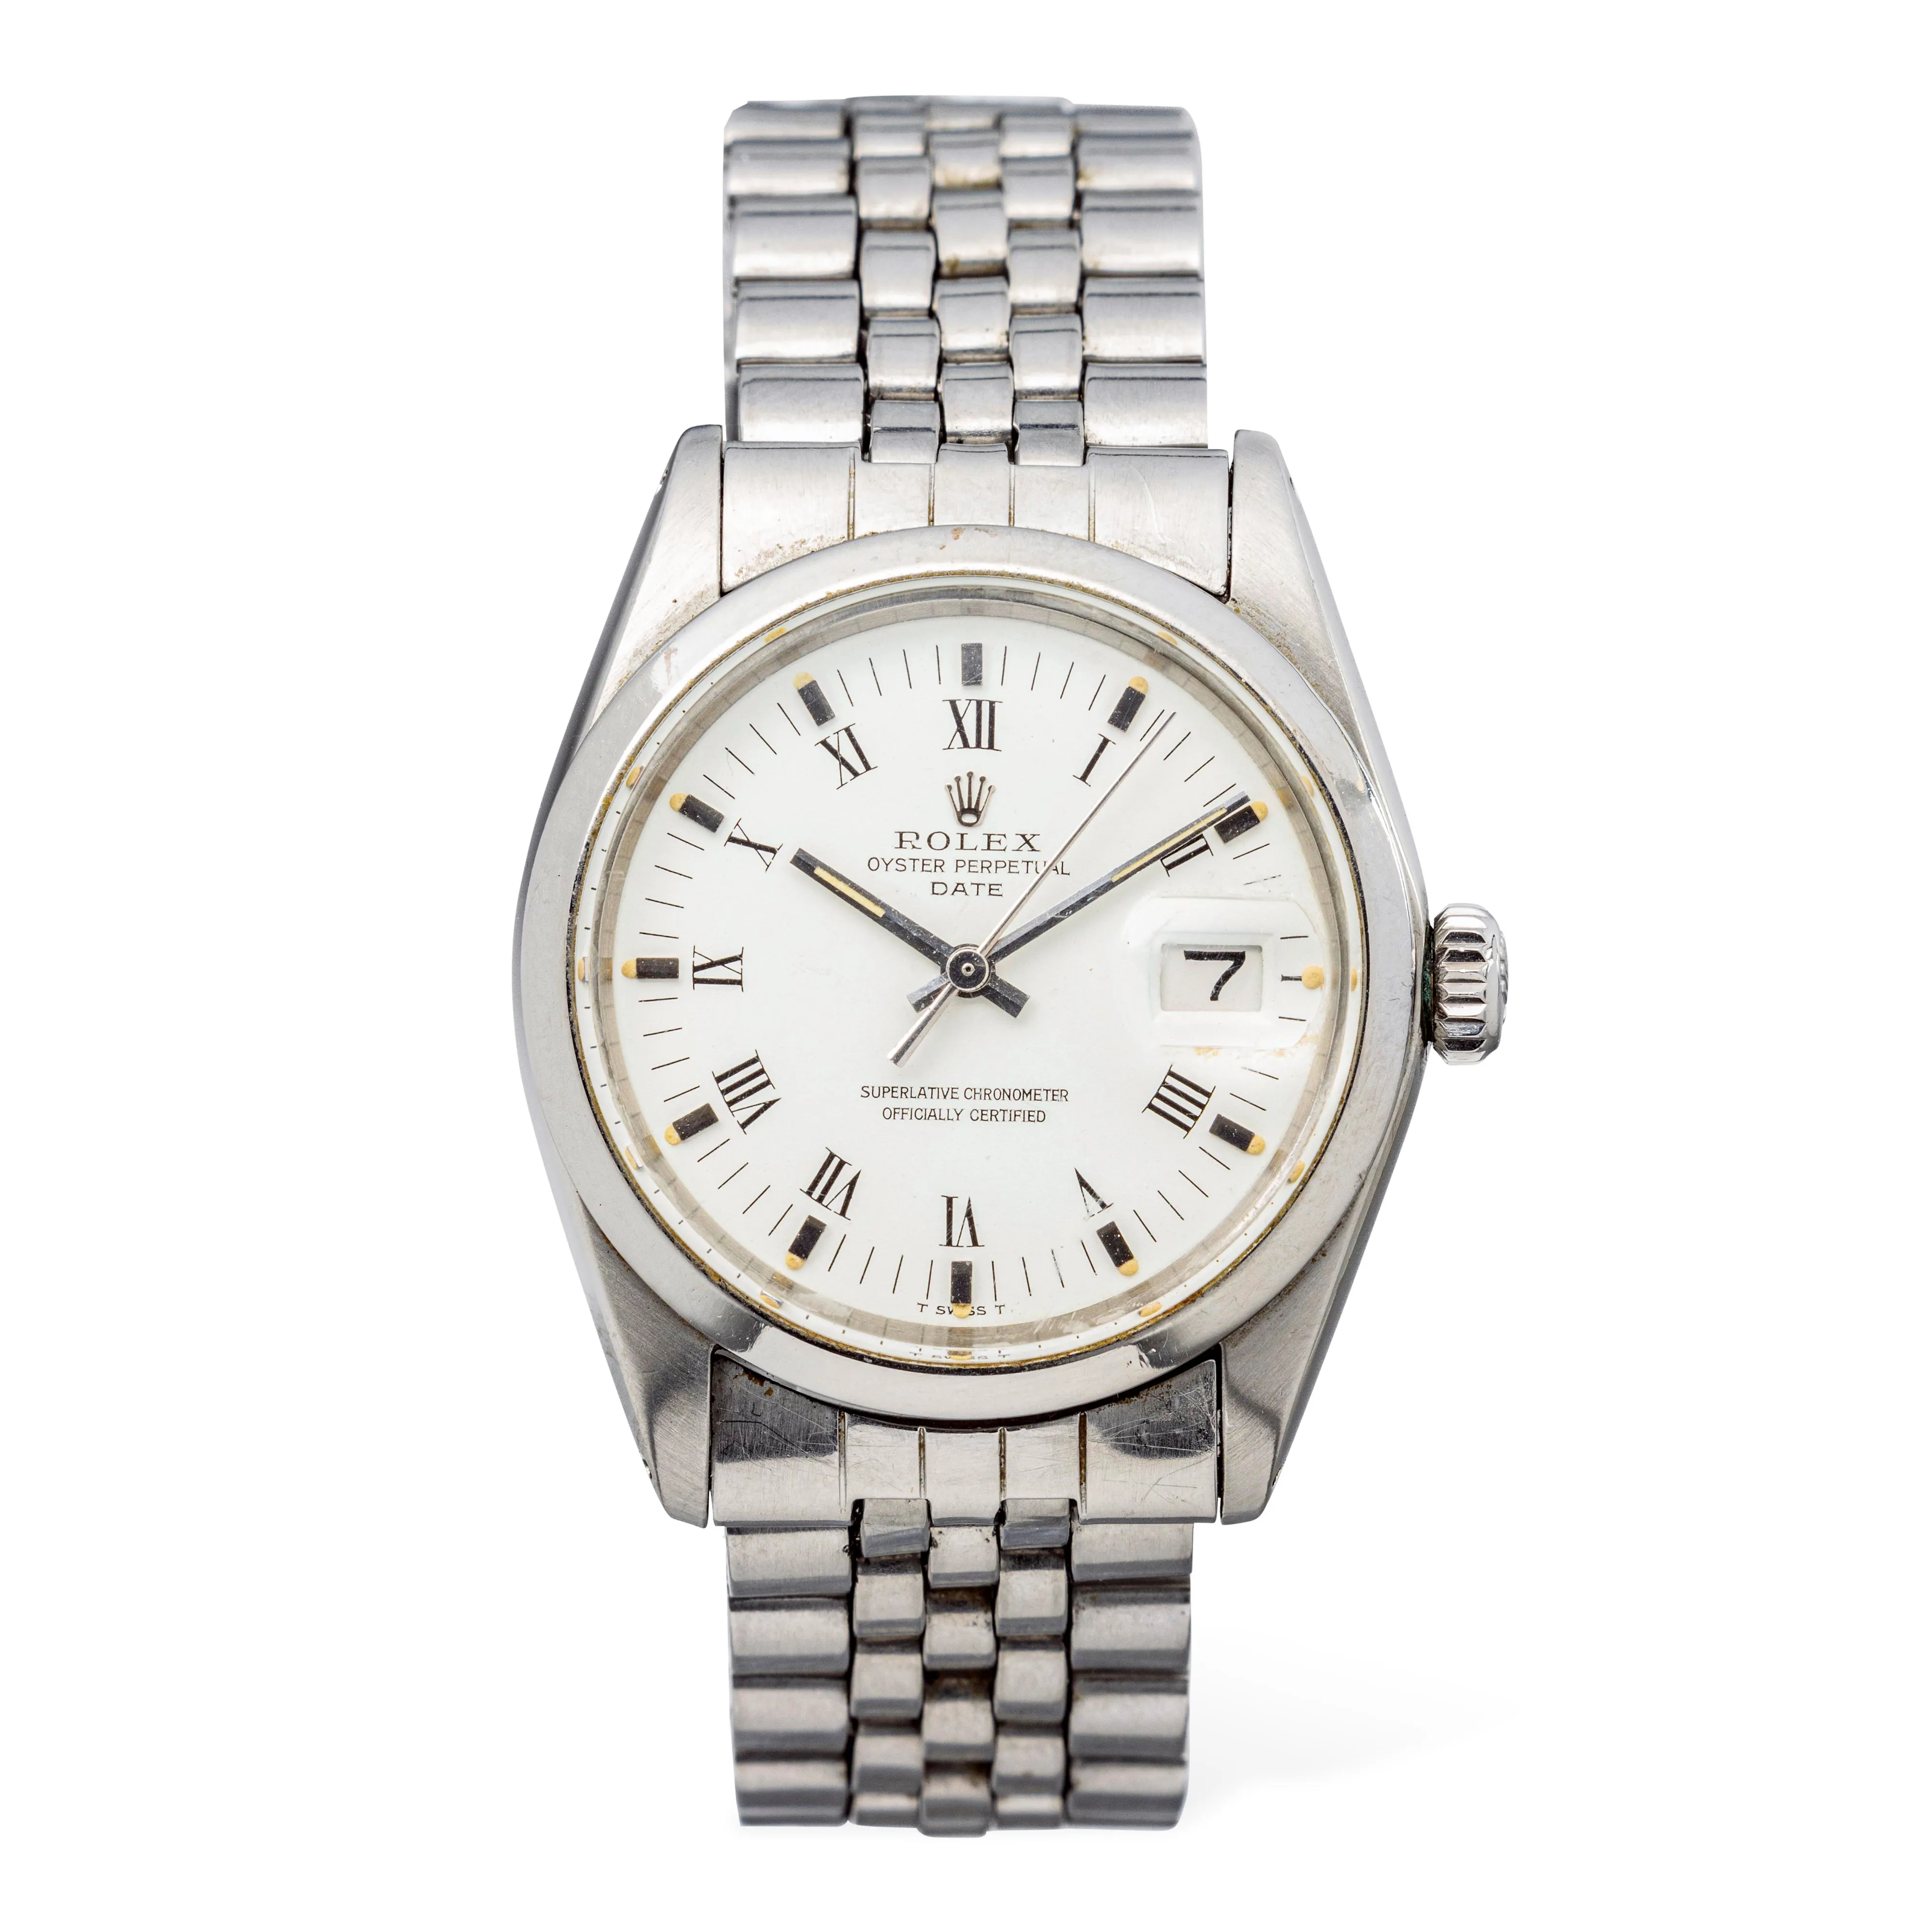 Rolex Oyster Perpetual Date 1500 33mm Stainless steel White